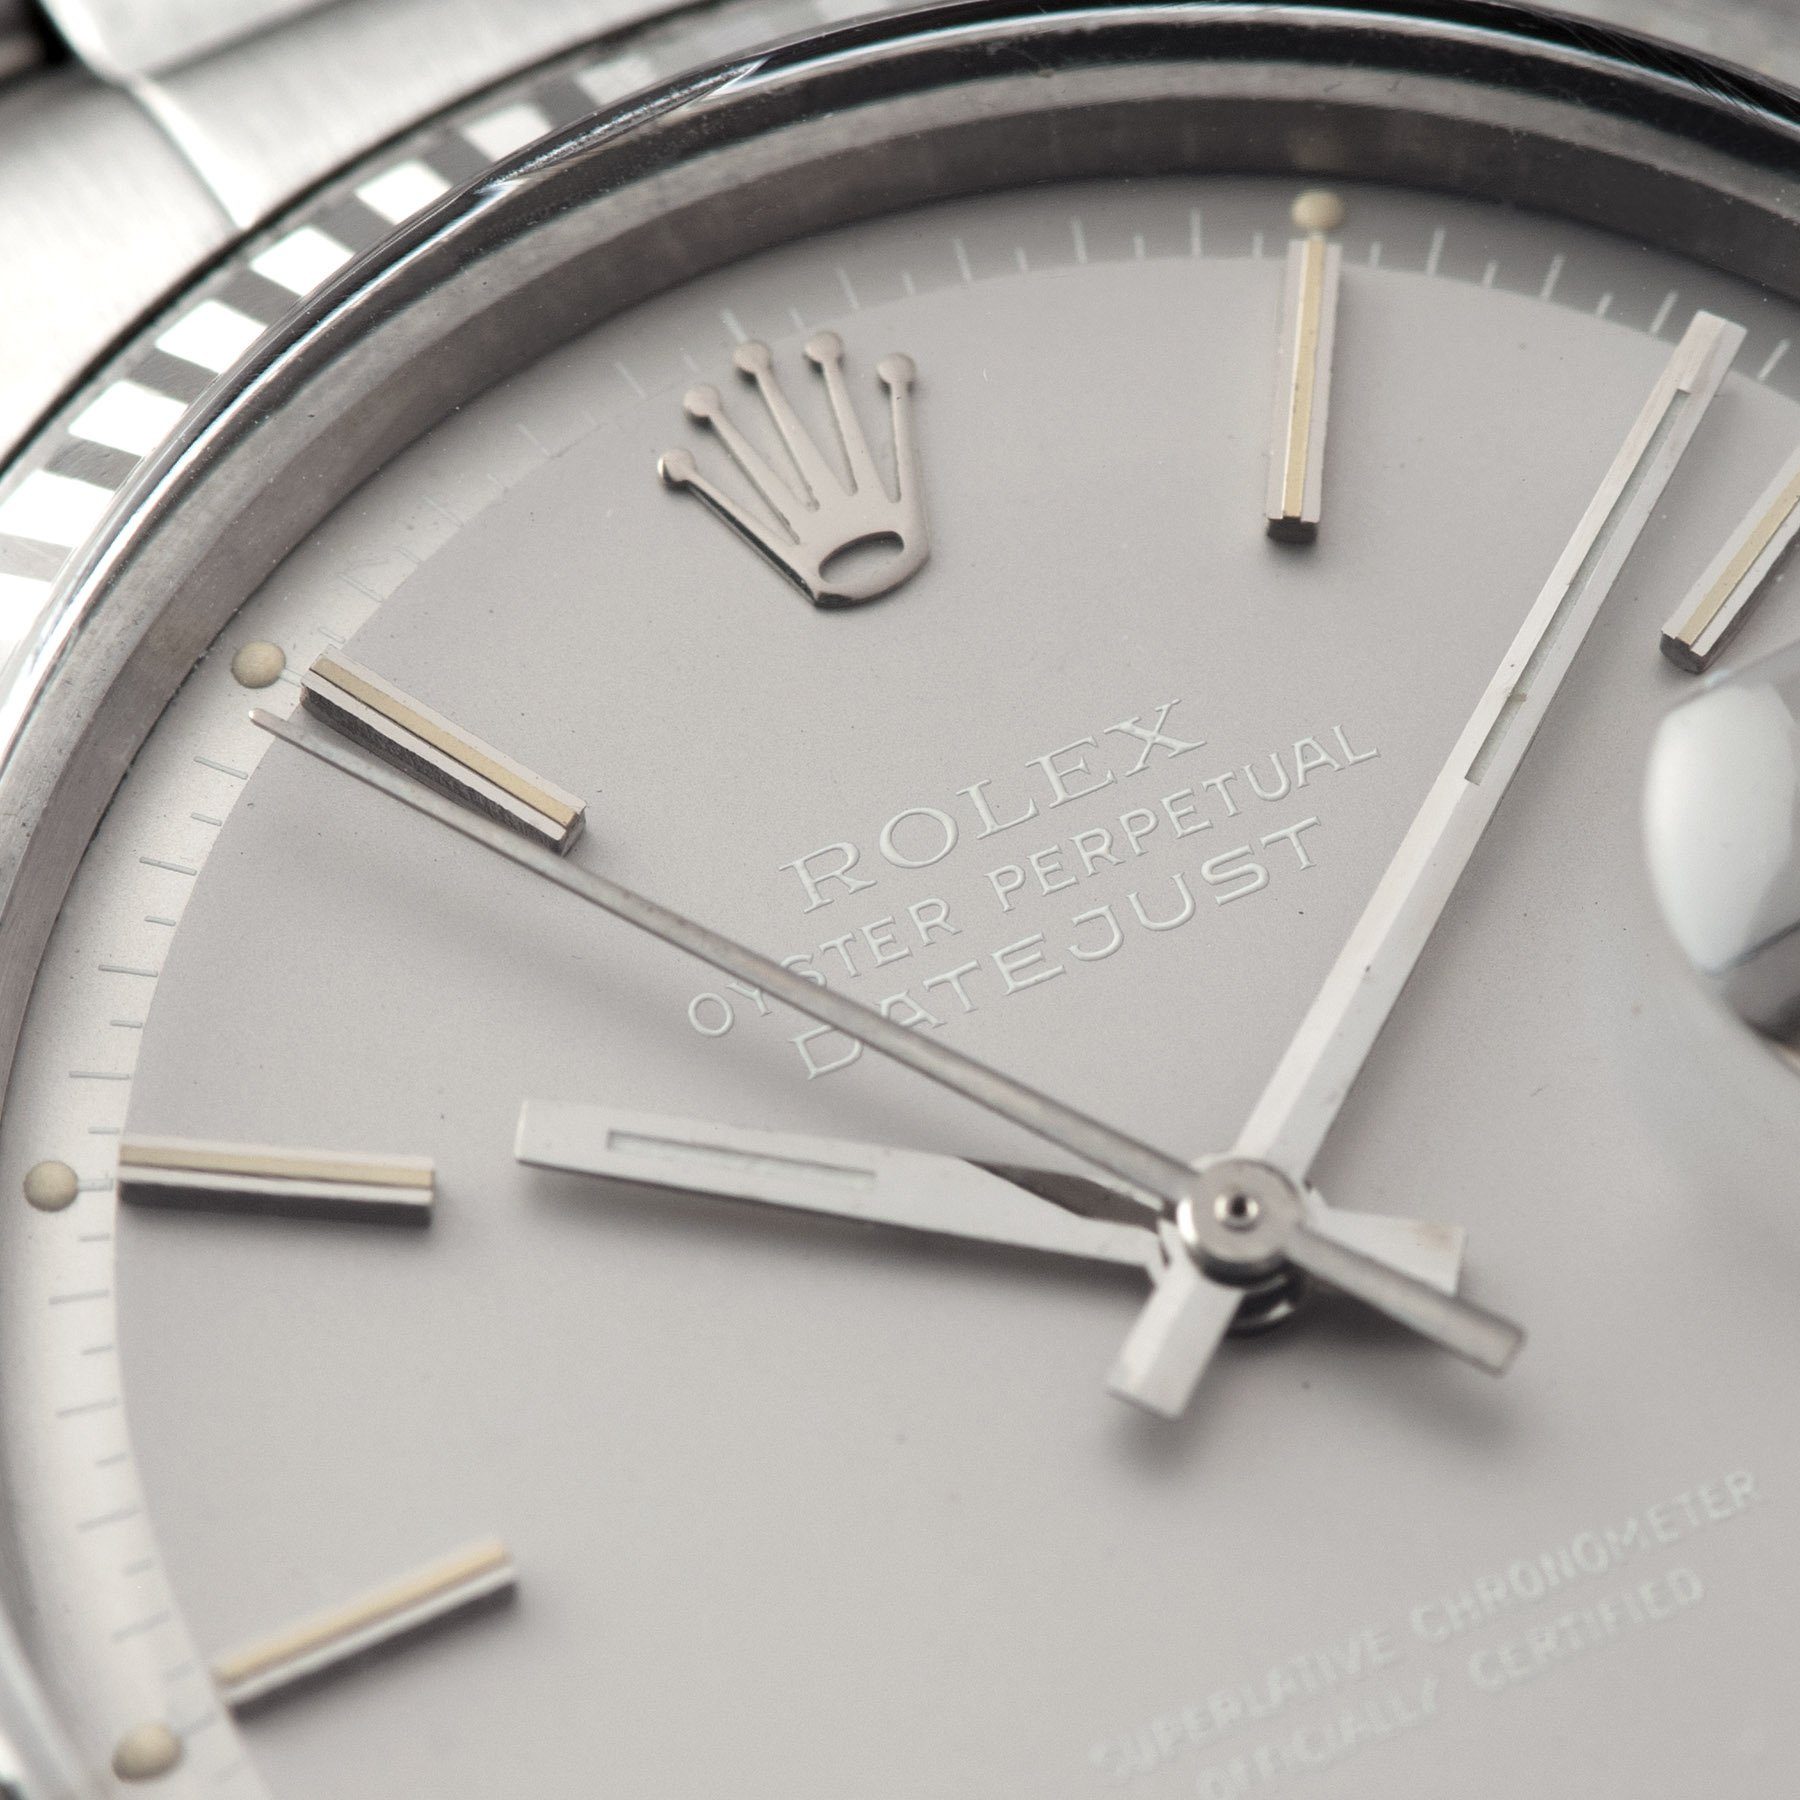 Rolex Datejust Ghost Dial 1601 with crisp text